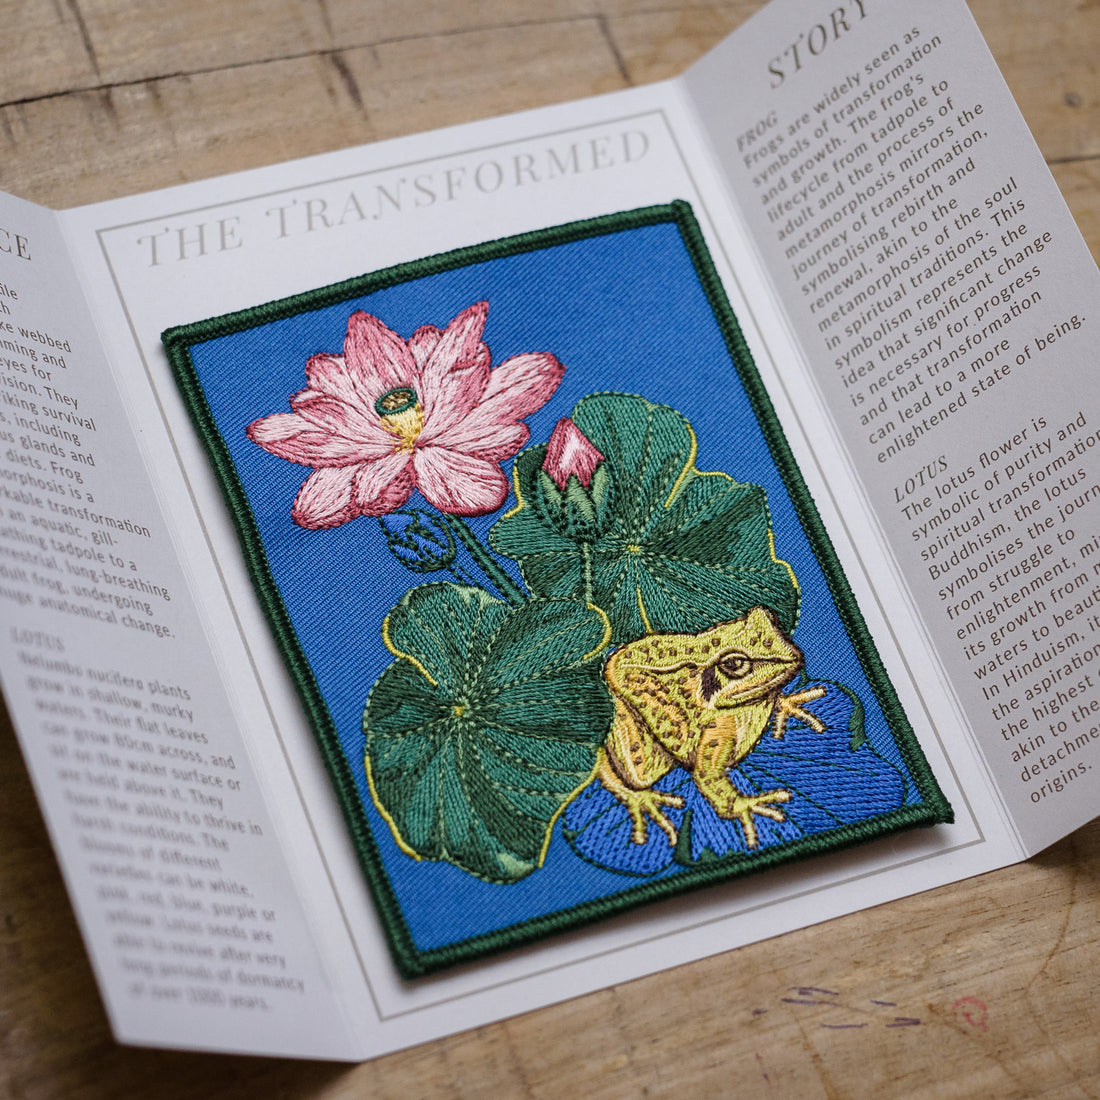 Frog and Lotus Embroidered Patch in gatefold card with science and story behind the species